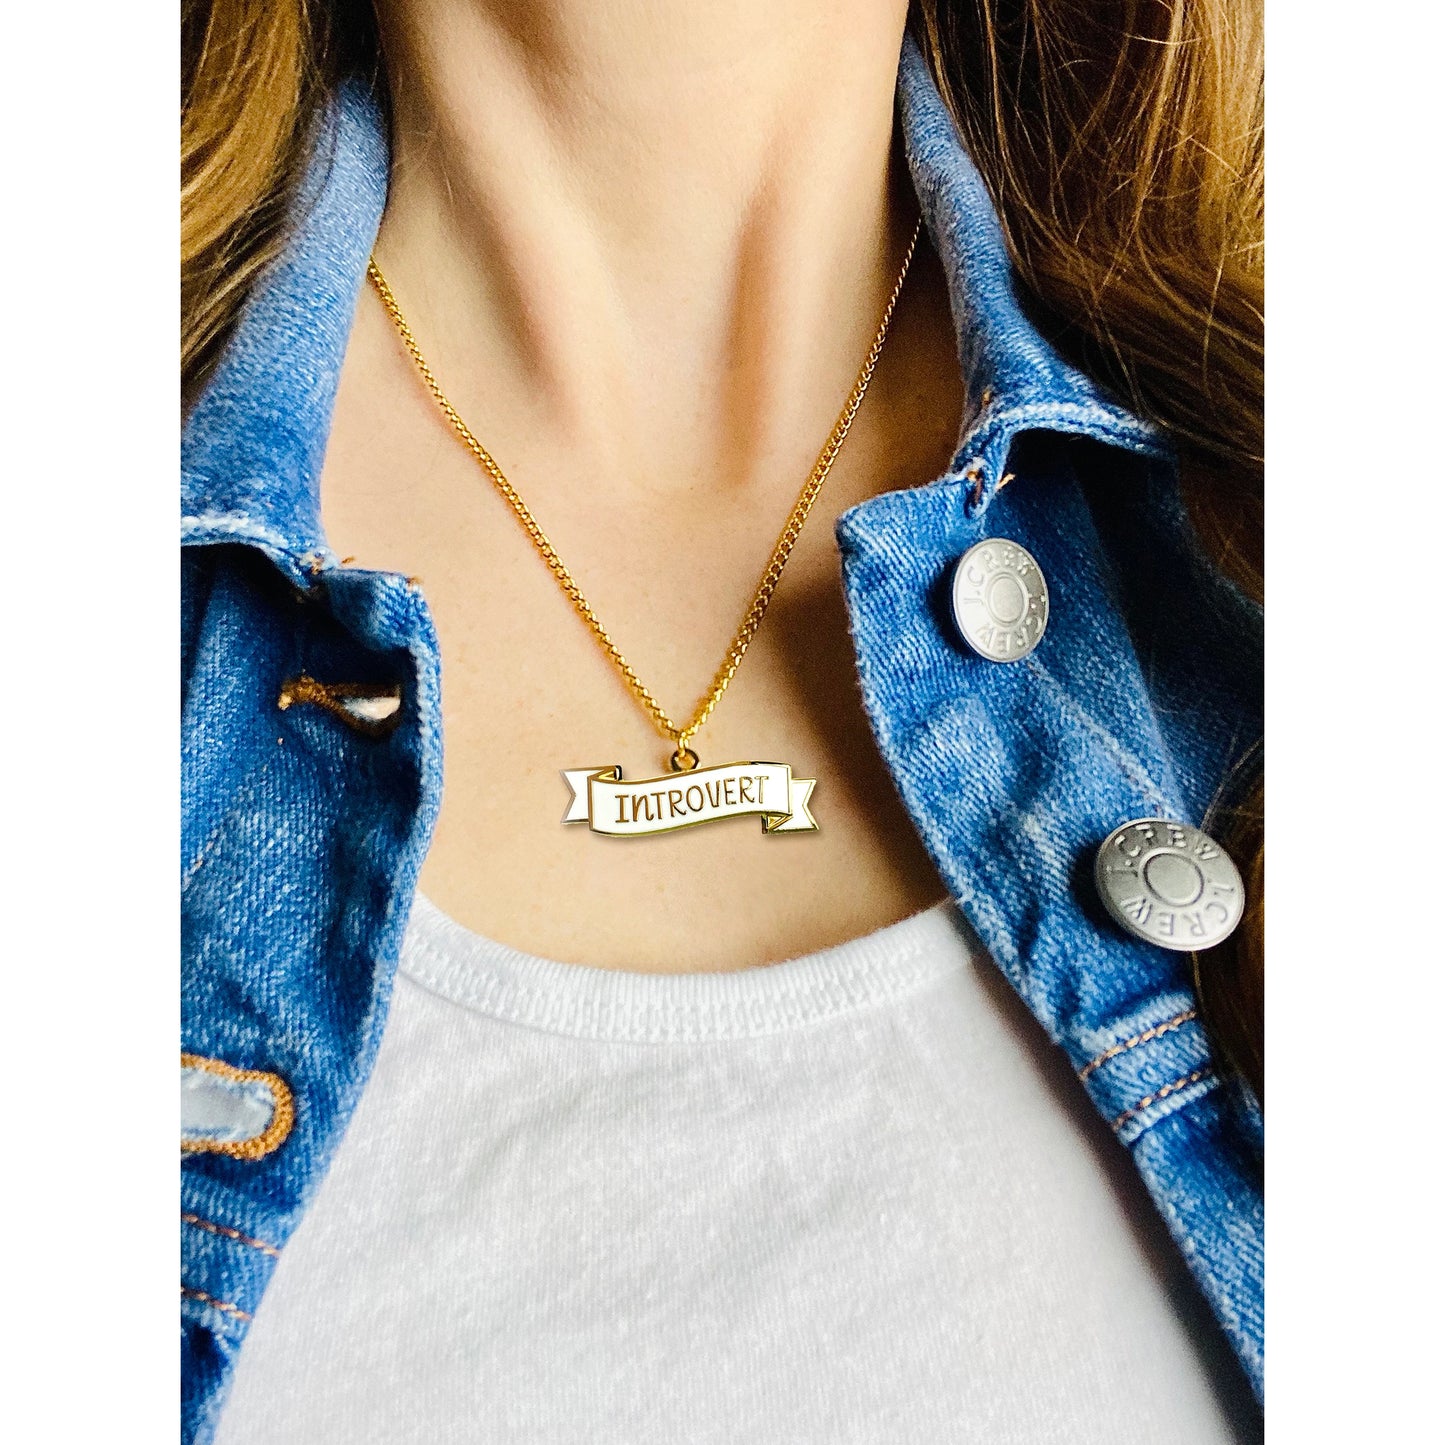 Introvert Necklace